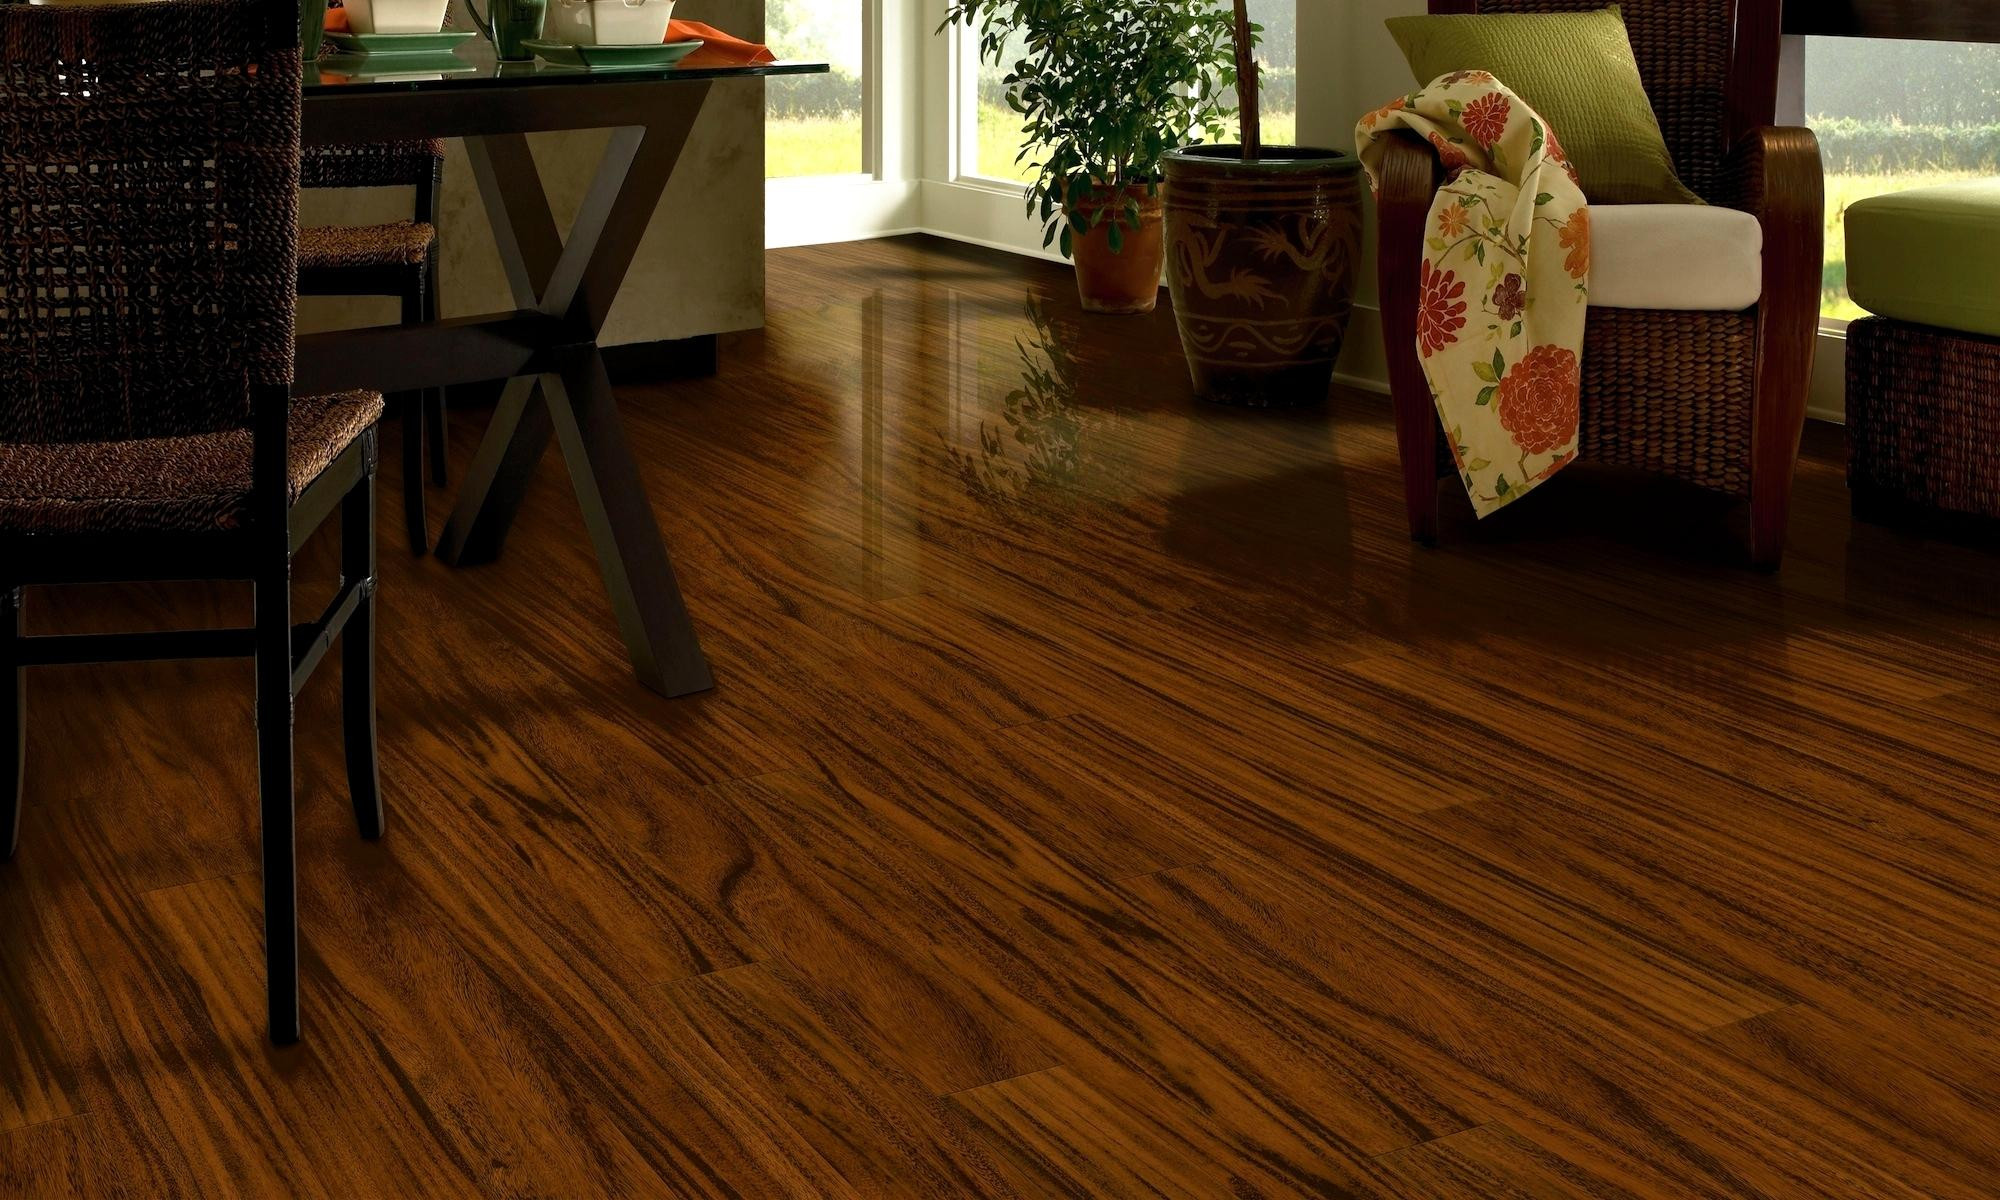 11 Wonderful Bruce Hardwood Flooring butterscotch Color 2024 free download bruce hardwood flooring butterscotch color of 33 ways to create favorable kitchen design bruce hardwood floors for 33 ways to create favorable kitchen design bruce hardwood floors ideas for 